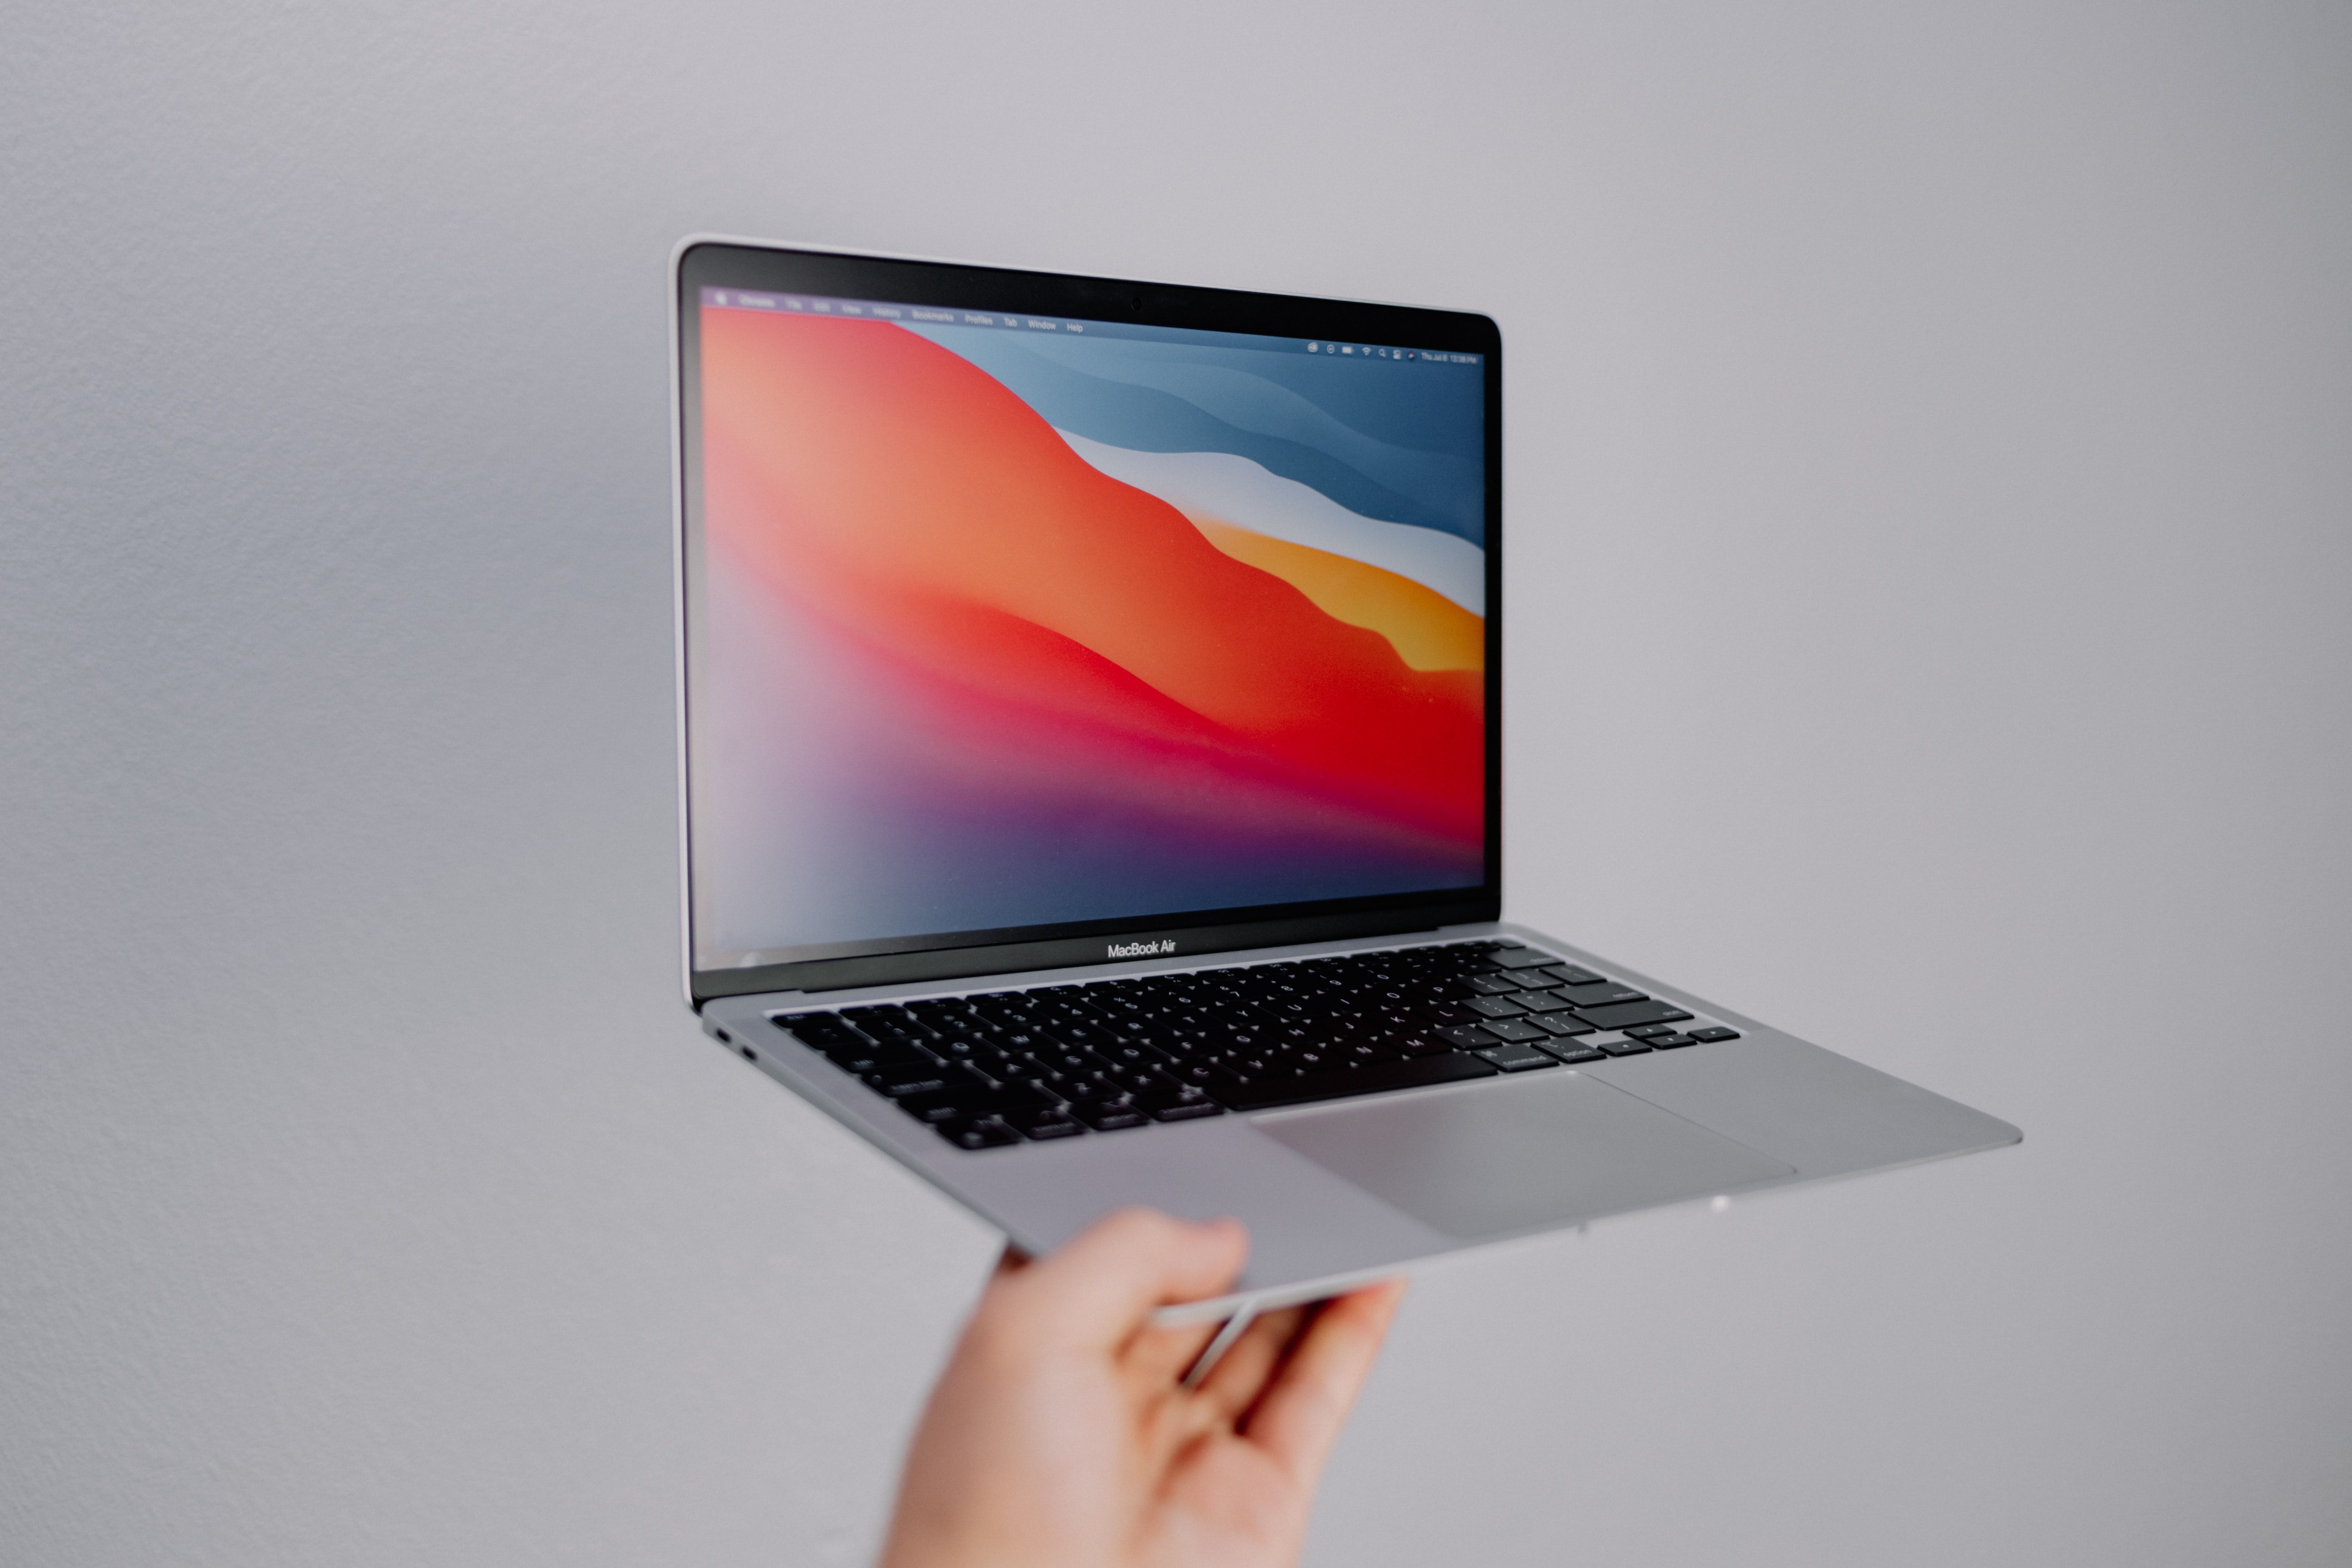 MacBook Air being held with white background 